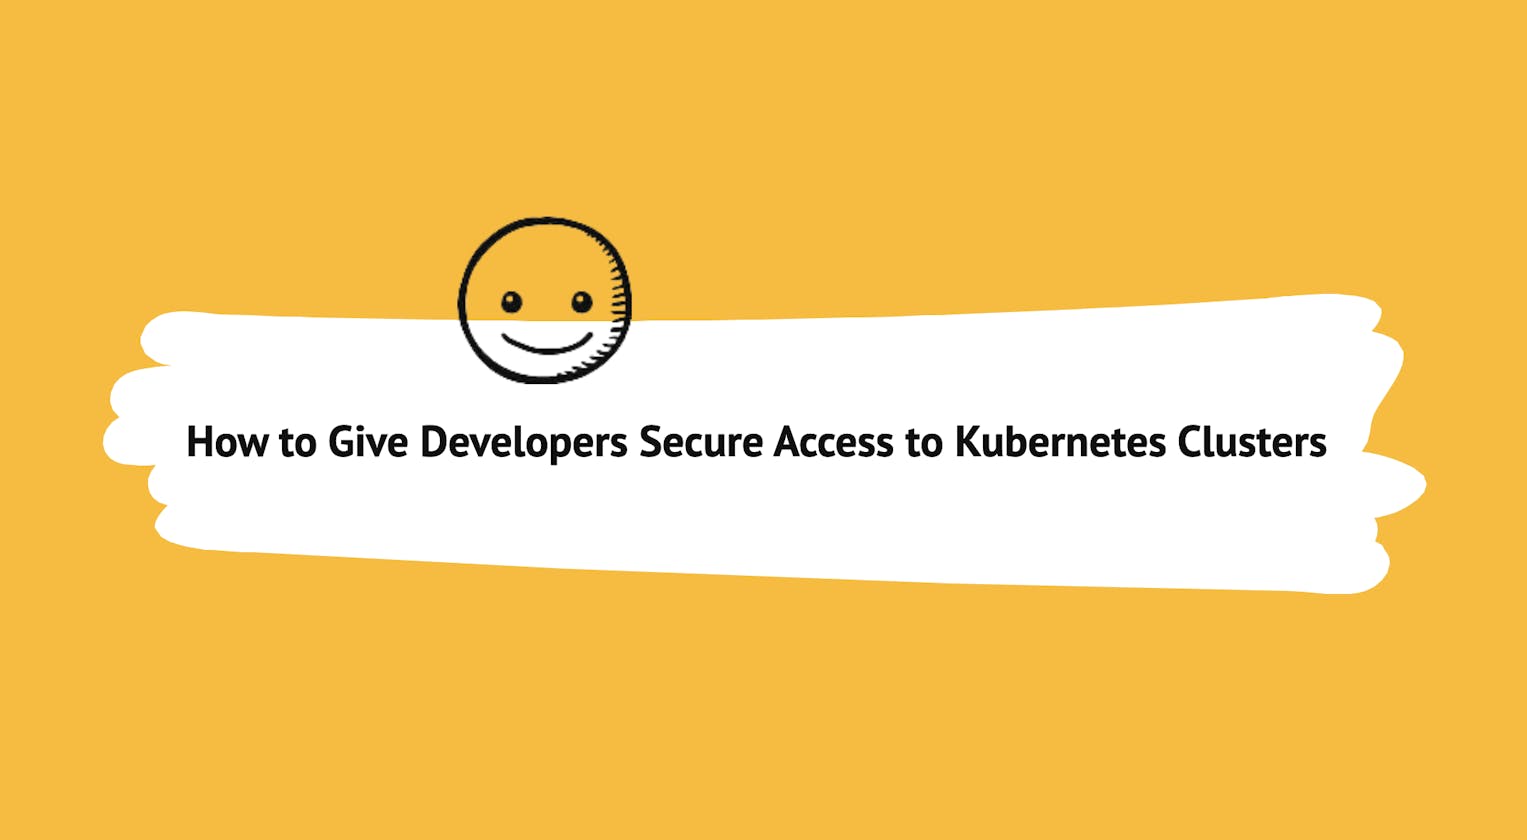 How to Give Developers Secure Access to Kubernetes Clusters